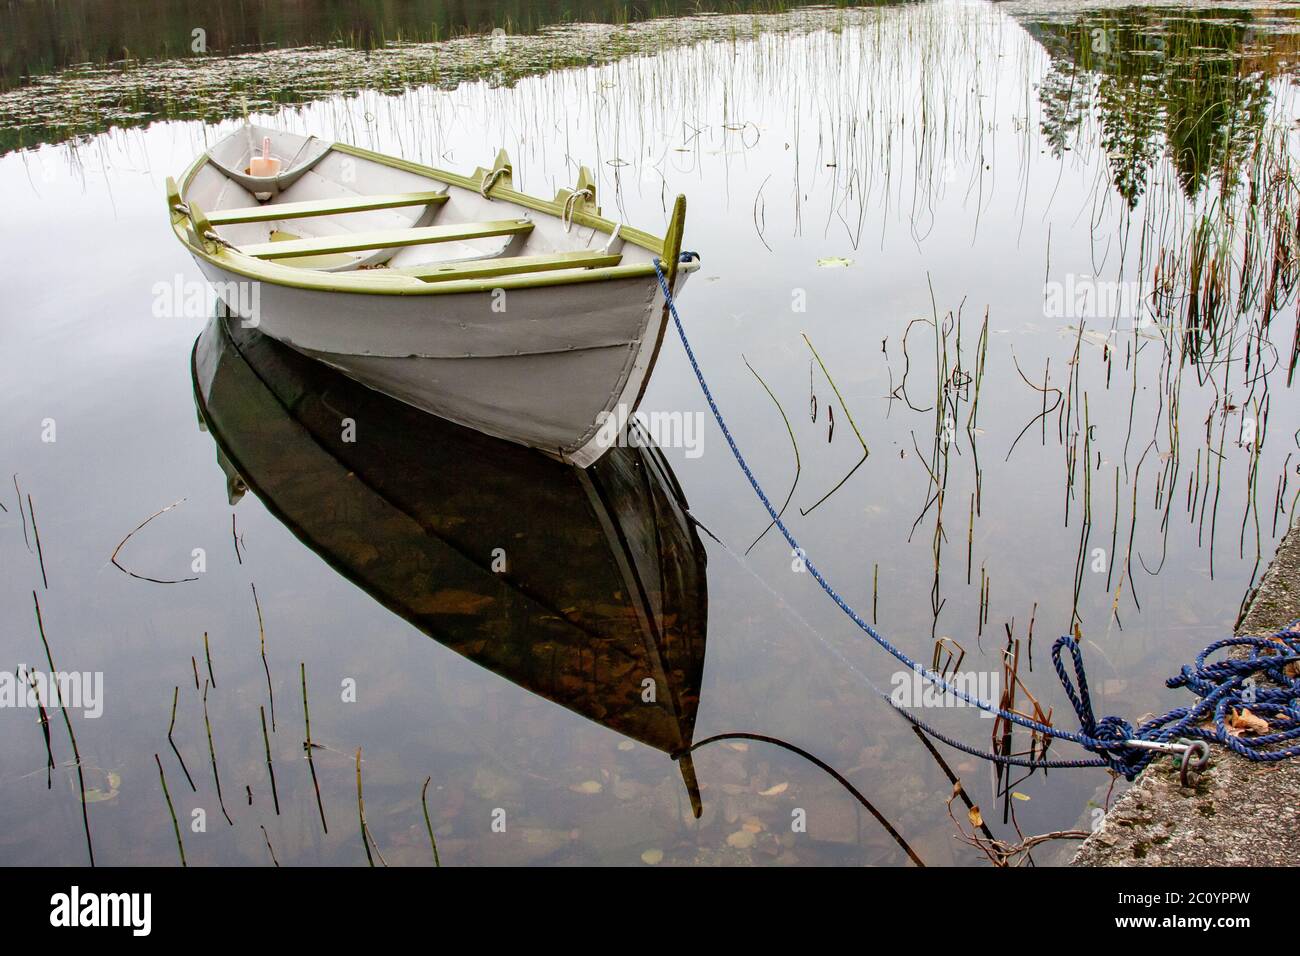 Old white row-boat on a tranquil lake Stock Photo